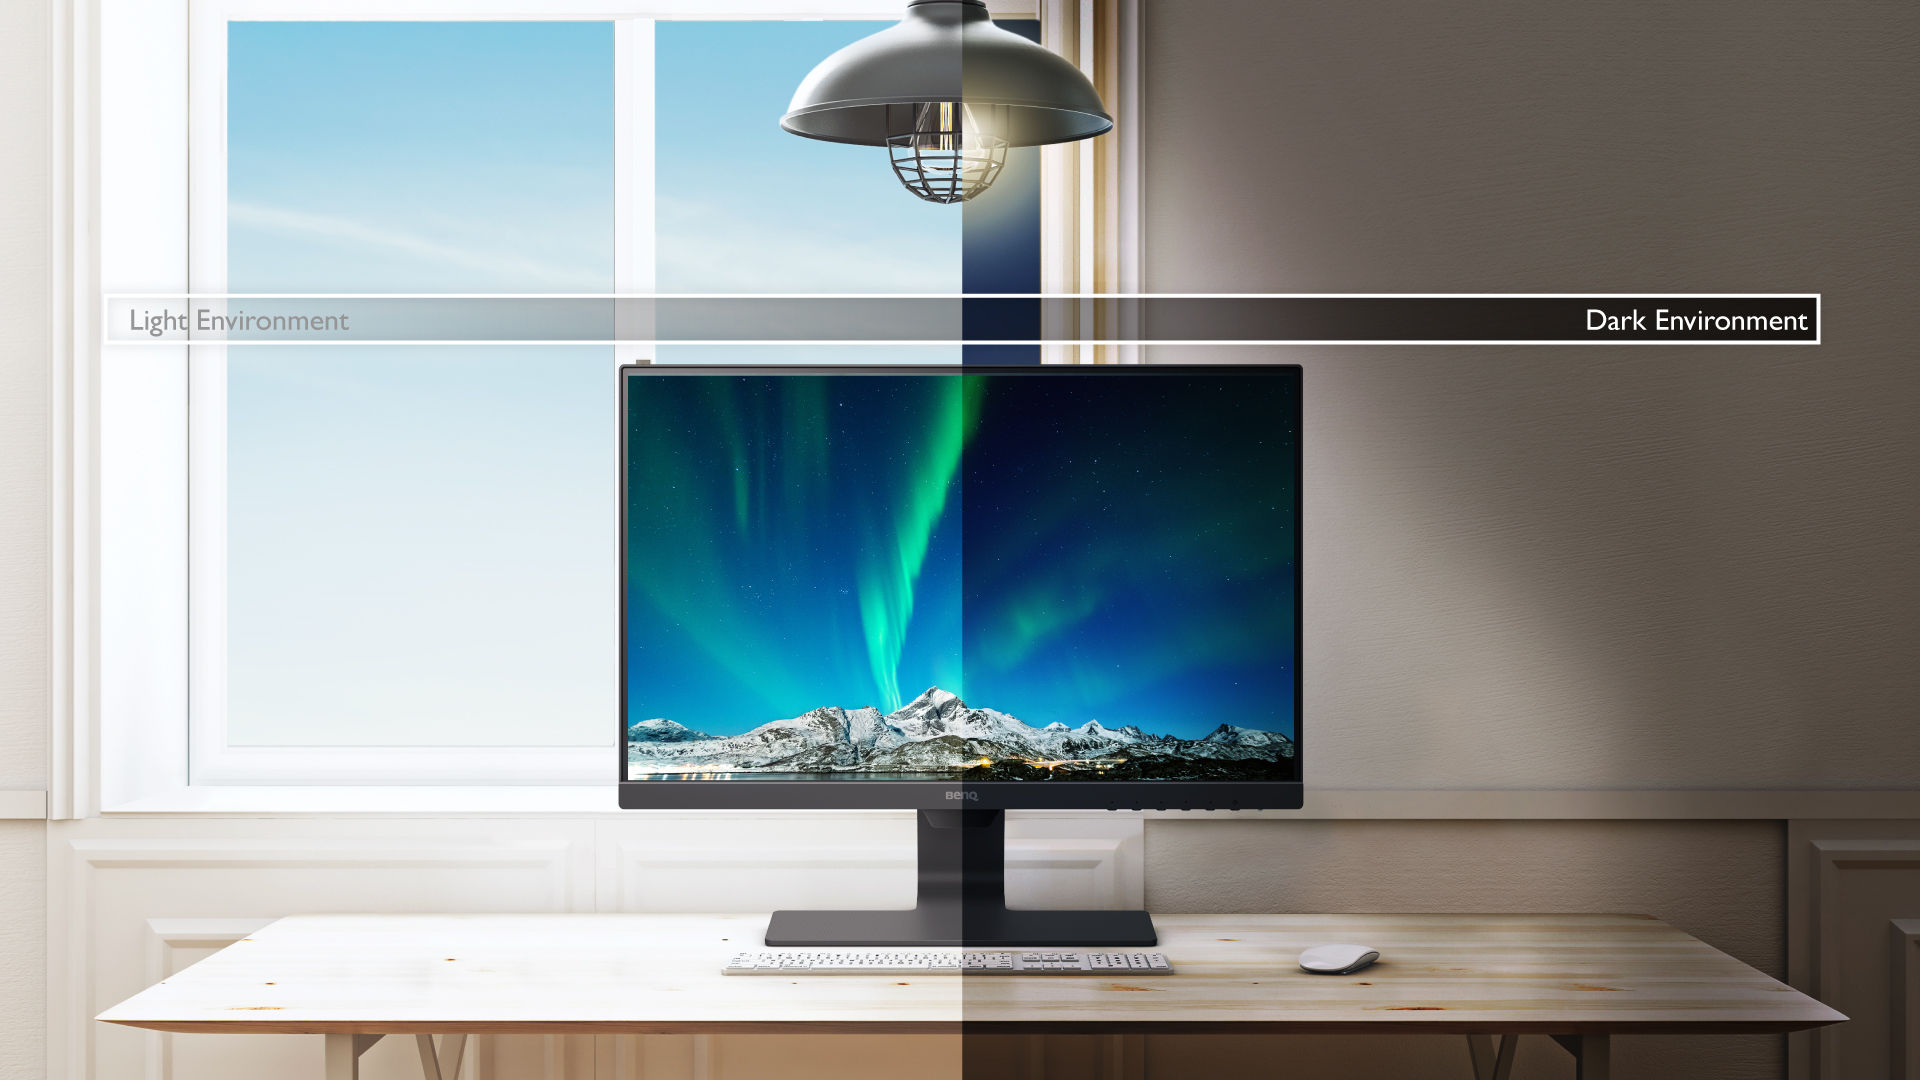 benq gw2381 b.i. sensor detects ambient light brightness and contrast of screen content and actively adjusts screen brightness for the most comfortable viewing